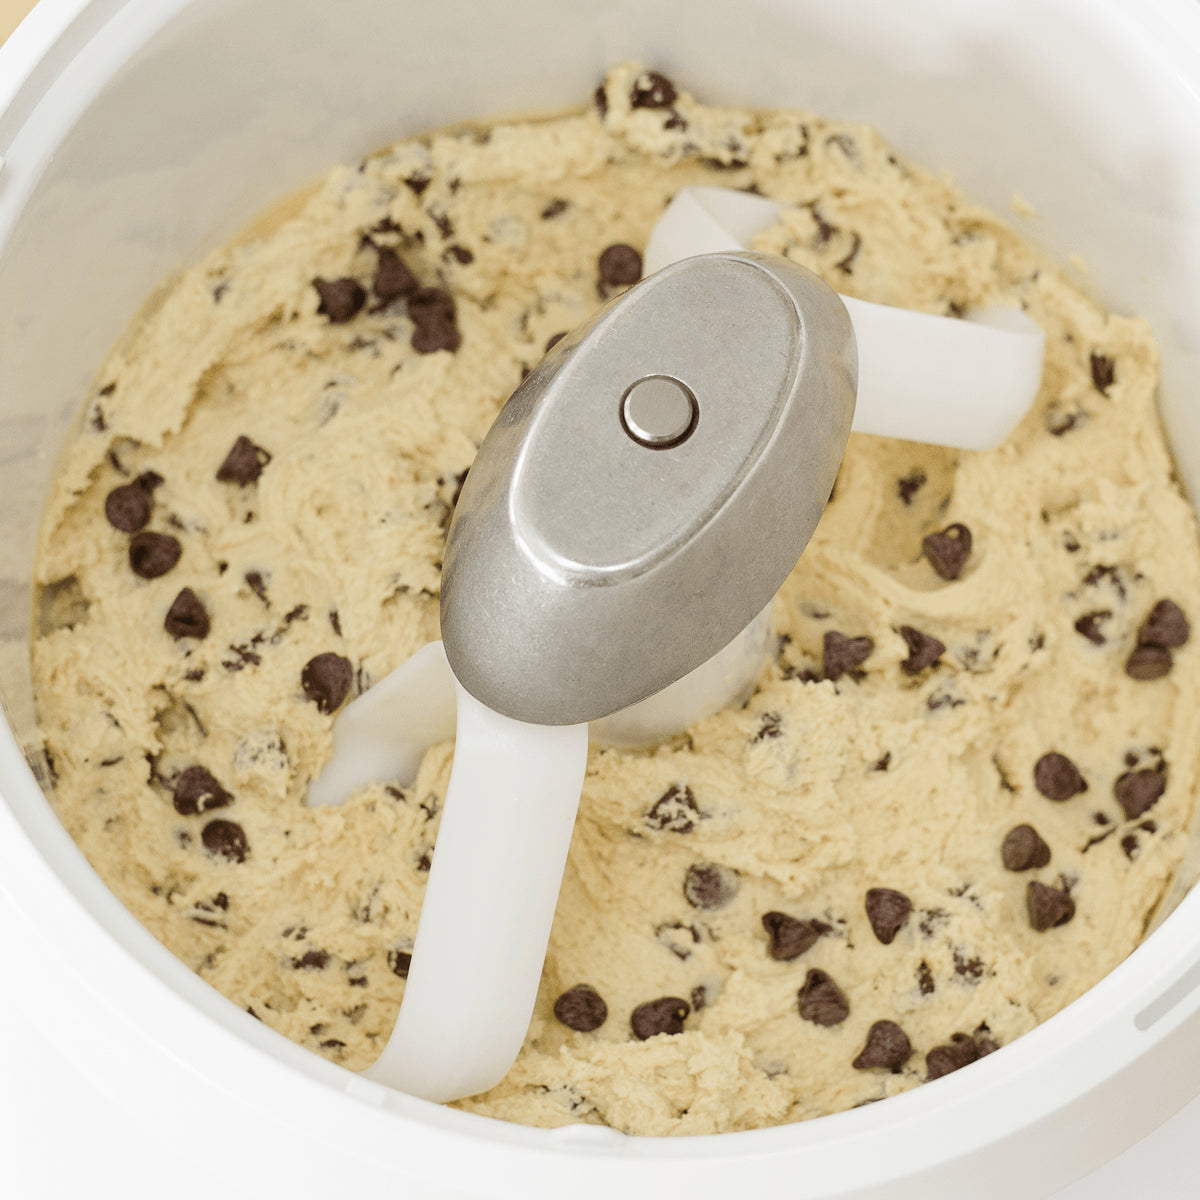 NutriMill Cookie Paddles with Metal Whip Drive for Bosch Universal Mixers  and NutriMill Artiste Mixer